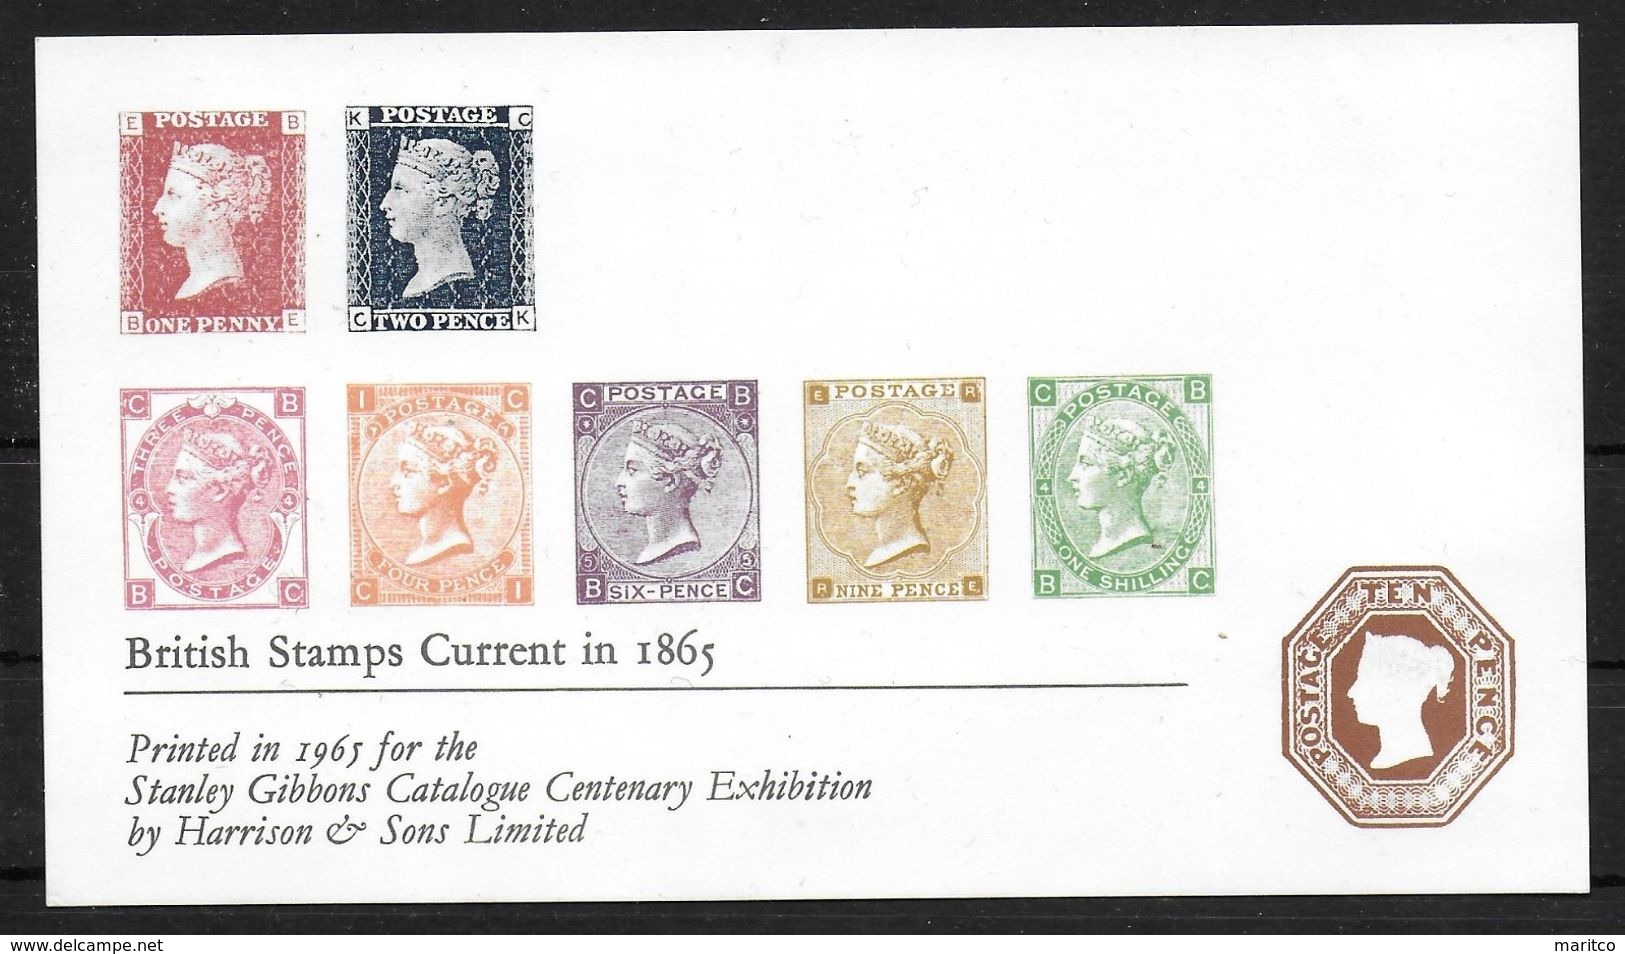 U.K. Card For The 1965 Stanley Gibbon Catalogue Centanary Exhibition  Reprints Of The 1865 Stamps Of GB - Ensayos, Pruebas & Reimpresiones